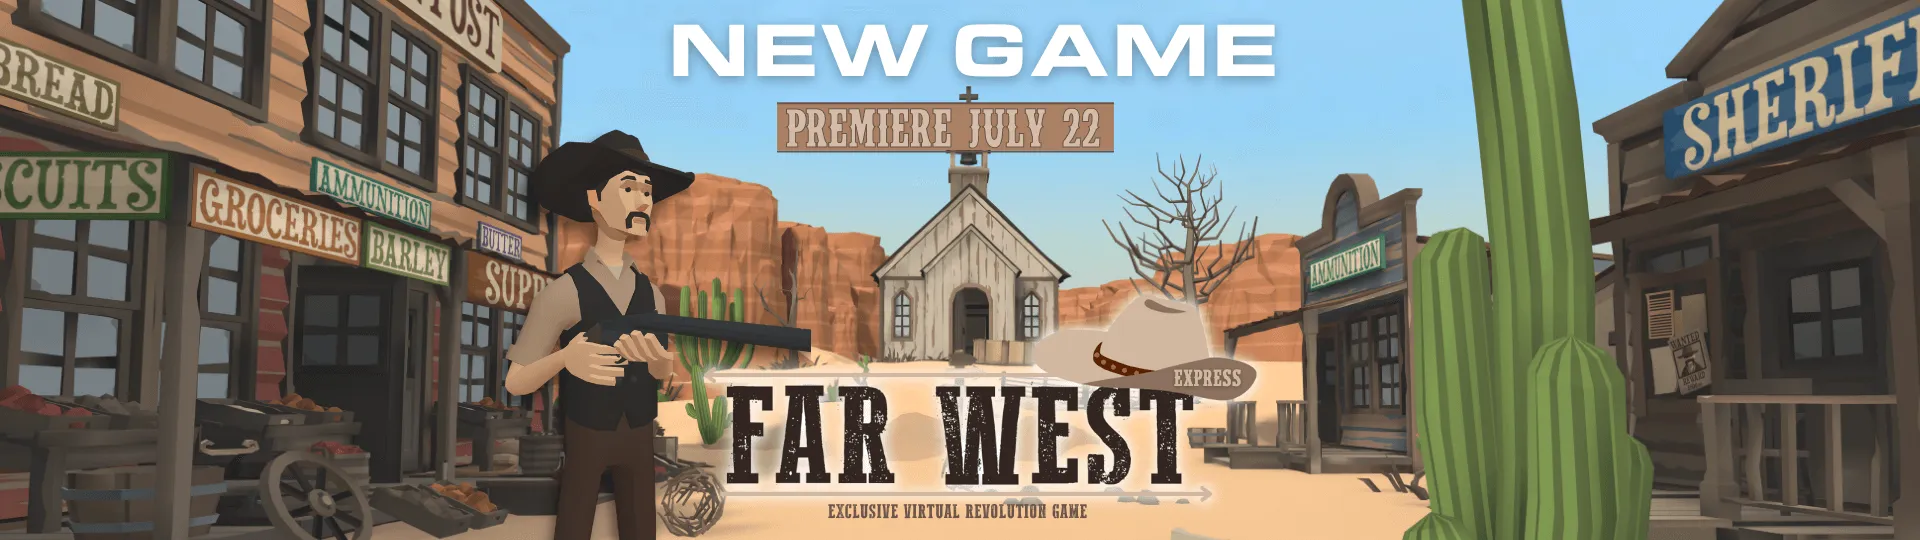 VRAirsoft New Game Far West Express